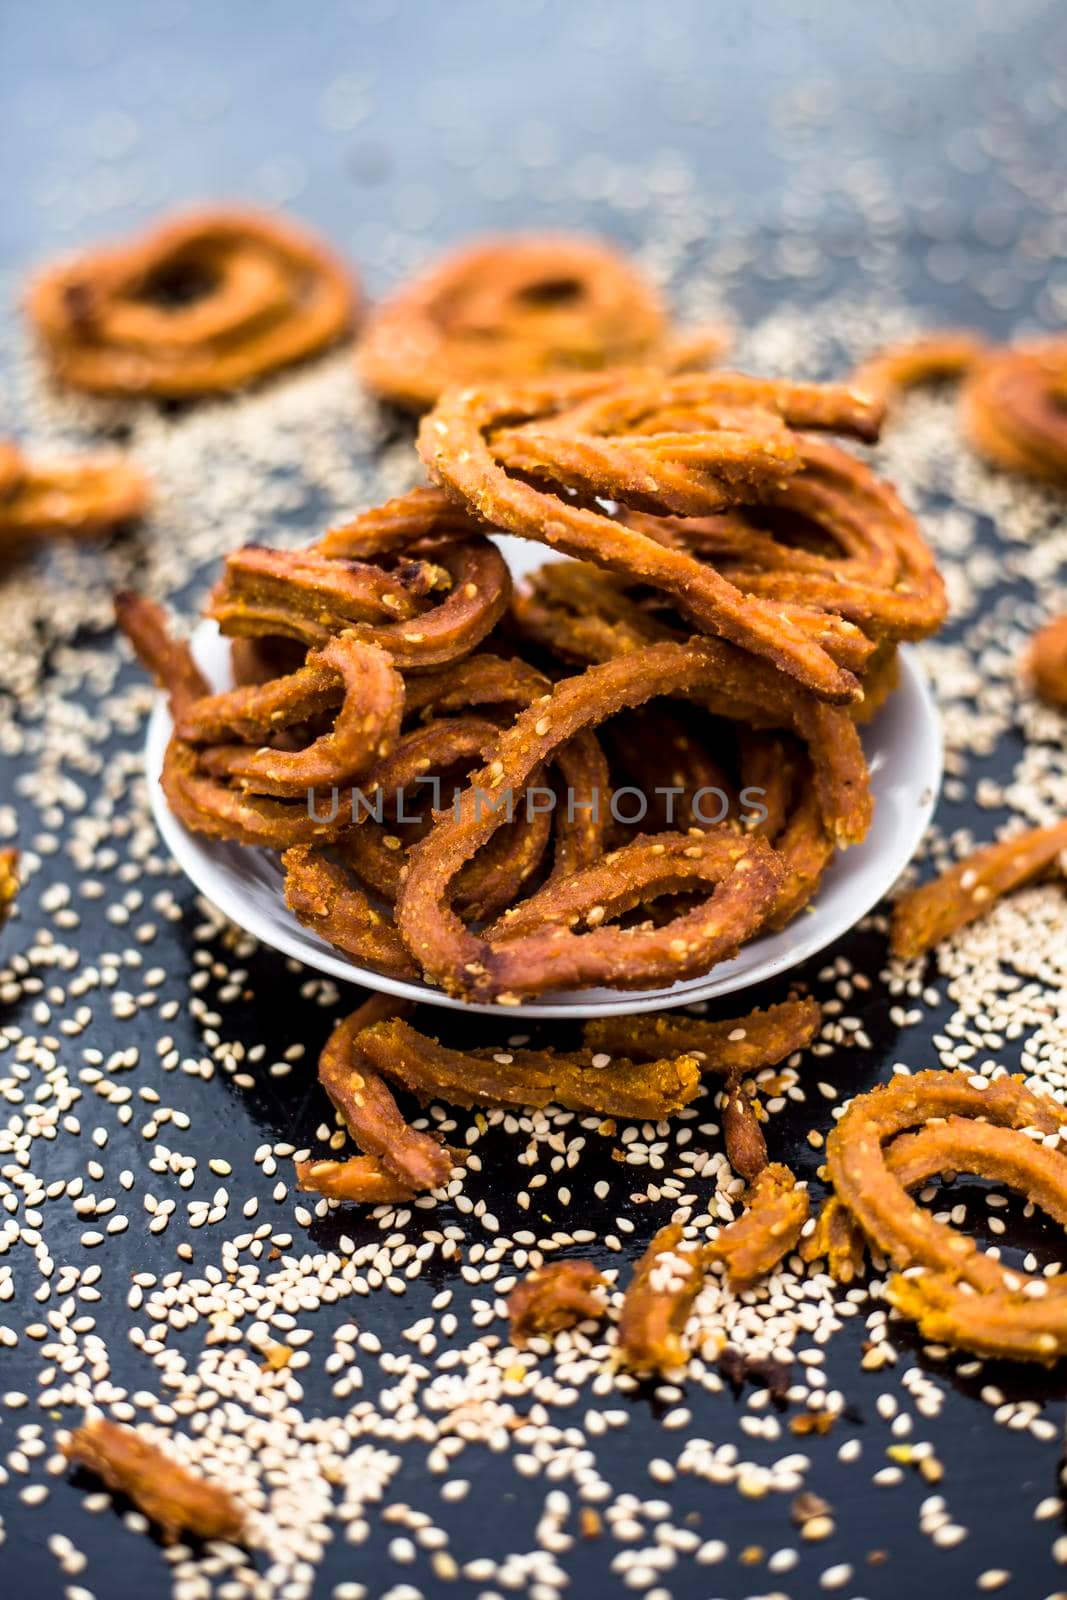 Famous Indian snack in a glass plate on the wooden surface along with raw sesame seeds or til spread on the surface.